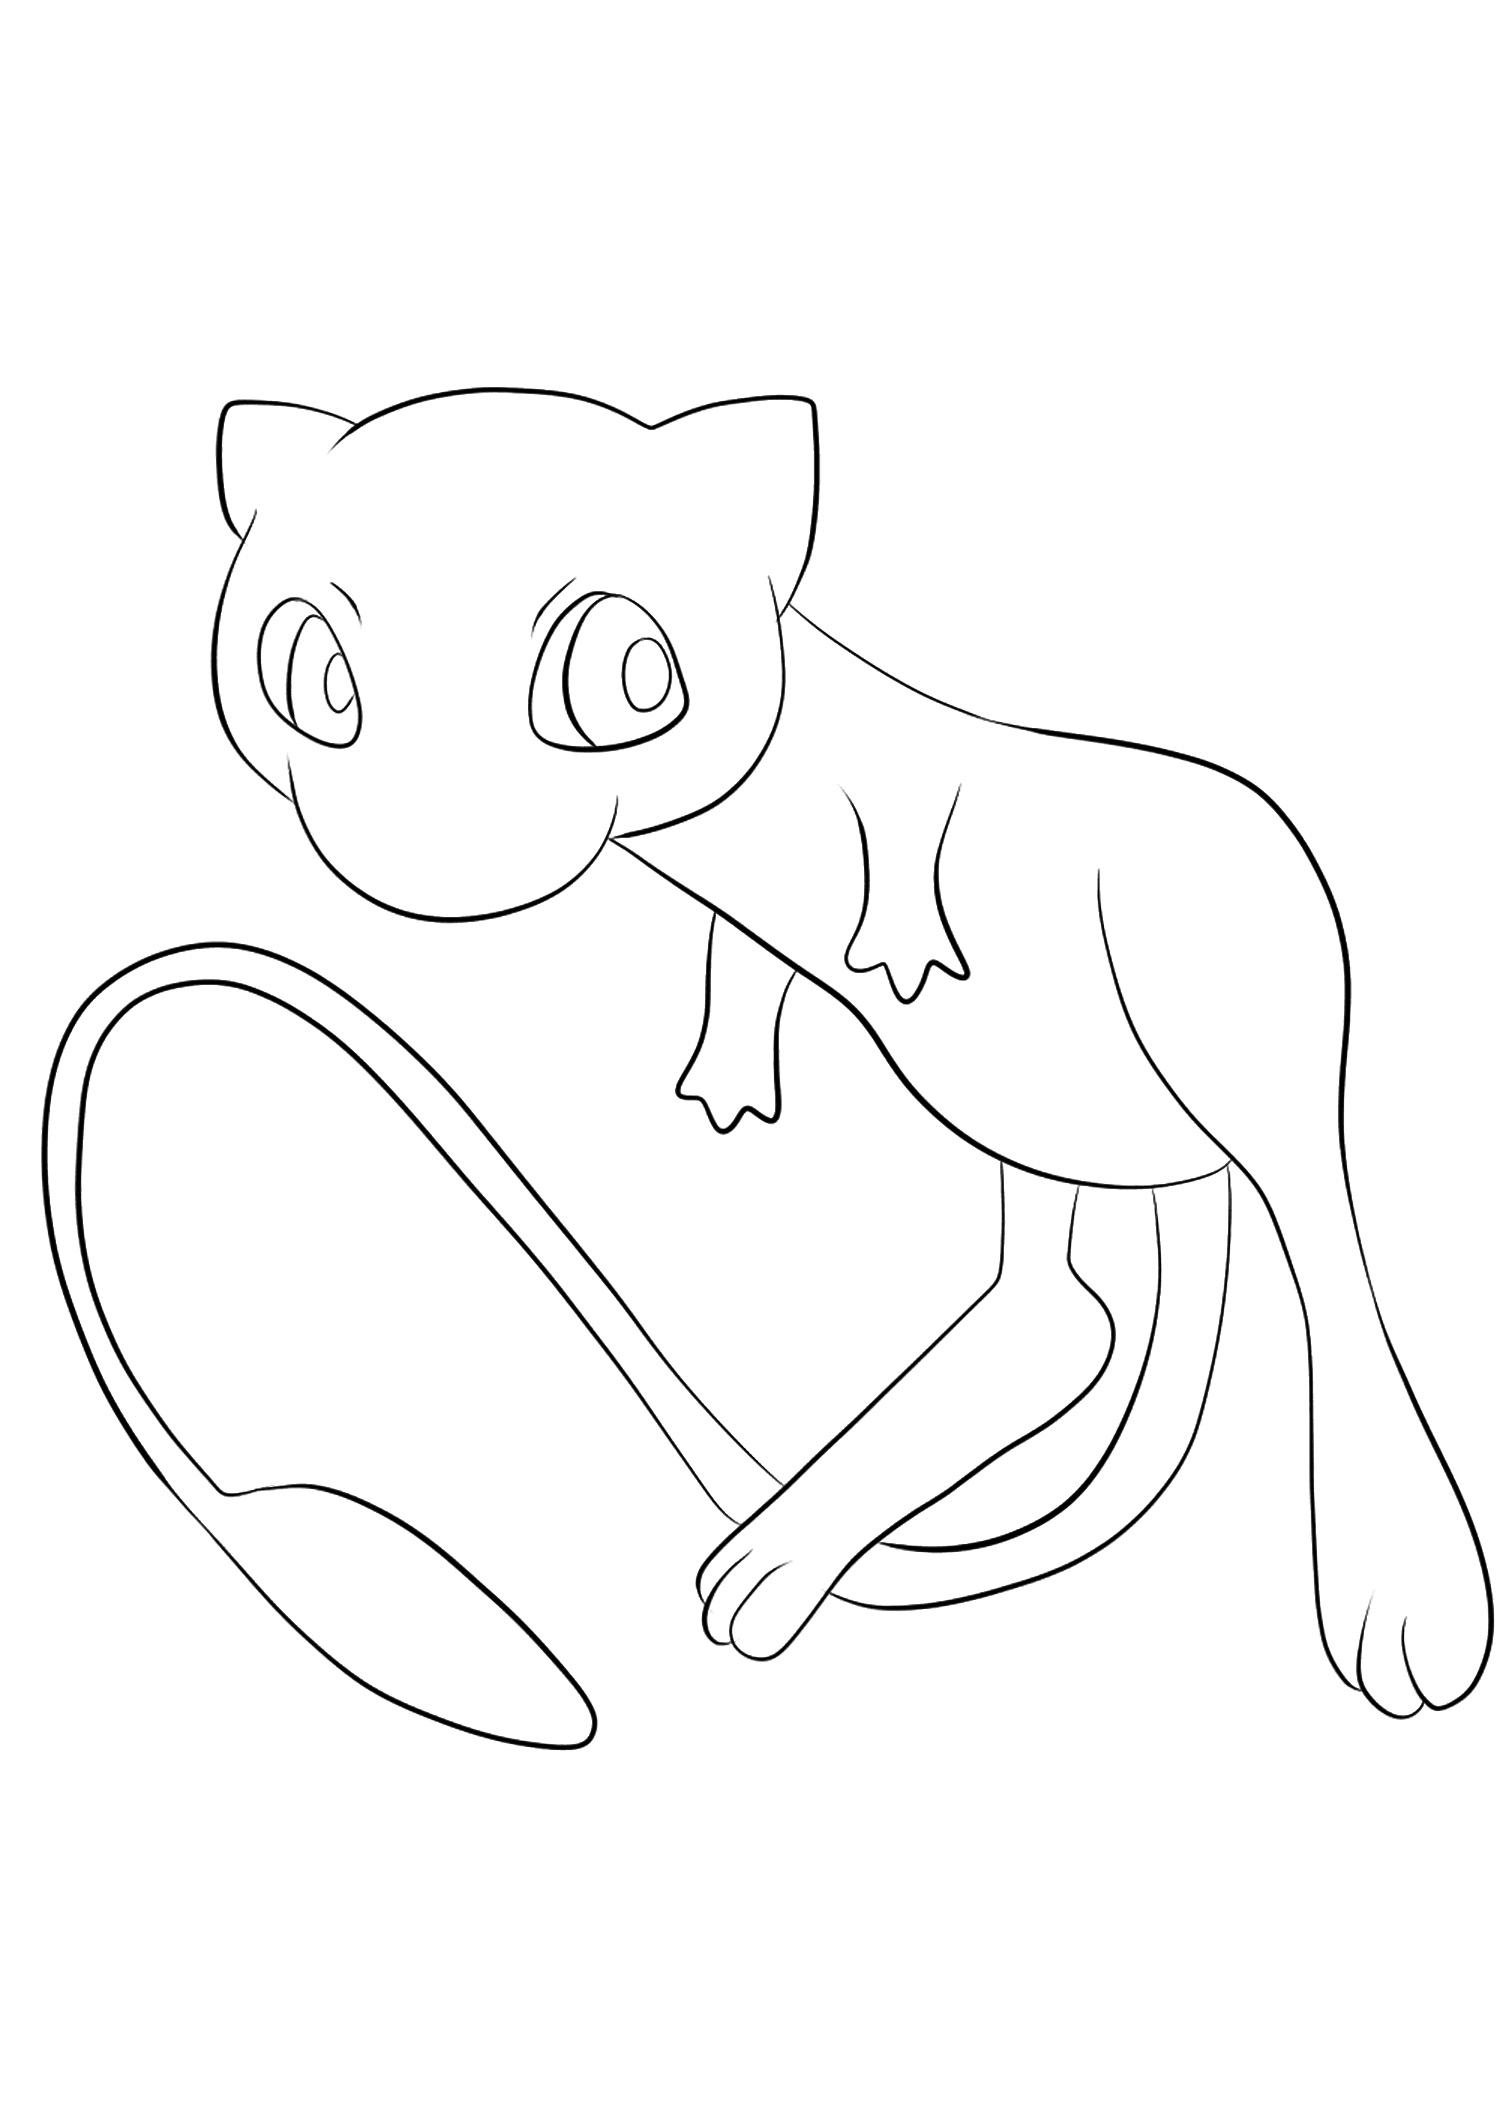 629 Animal Mew Coloring Page for Adult